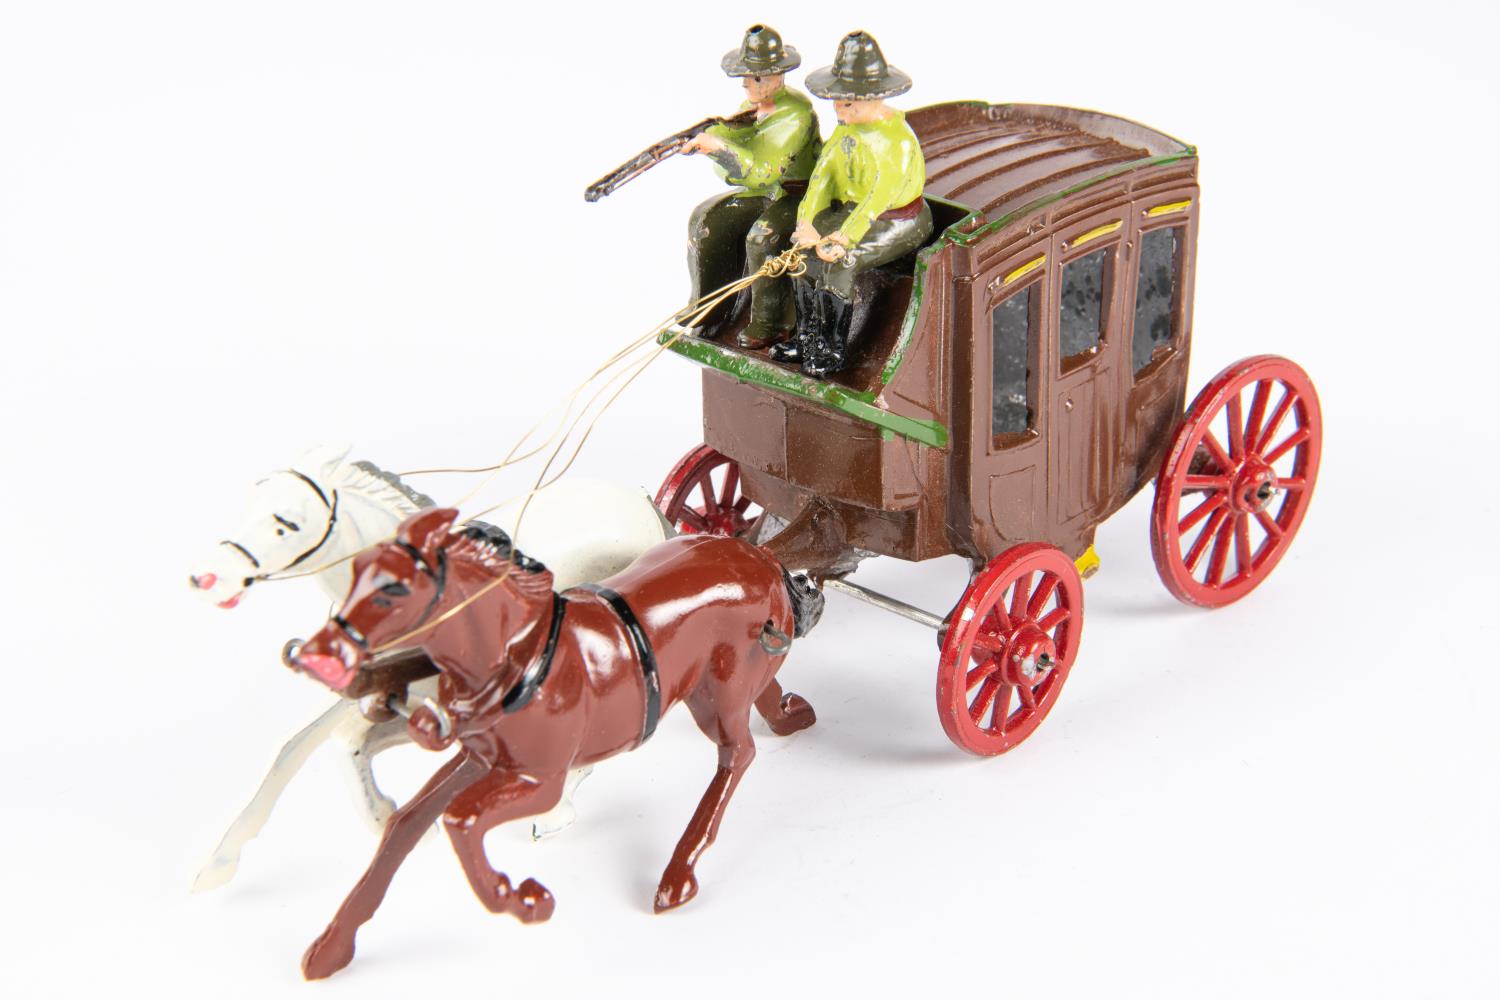 Johillco miniature Stage coach measuring 17cm in length, finished in brown with green and gold - Image 2 of 5